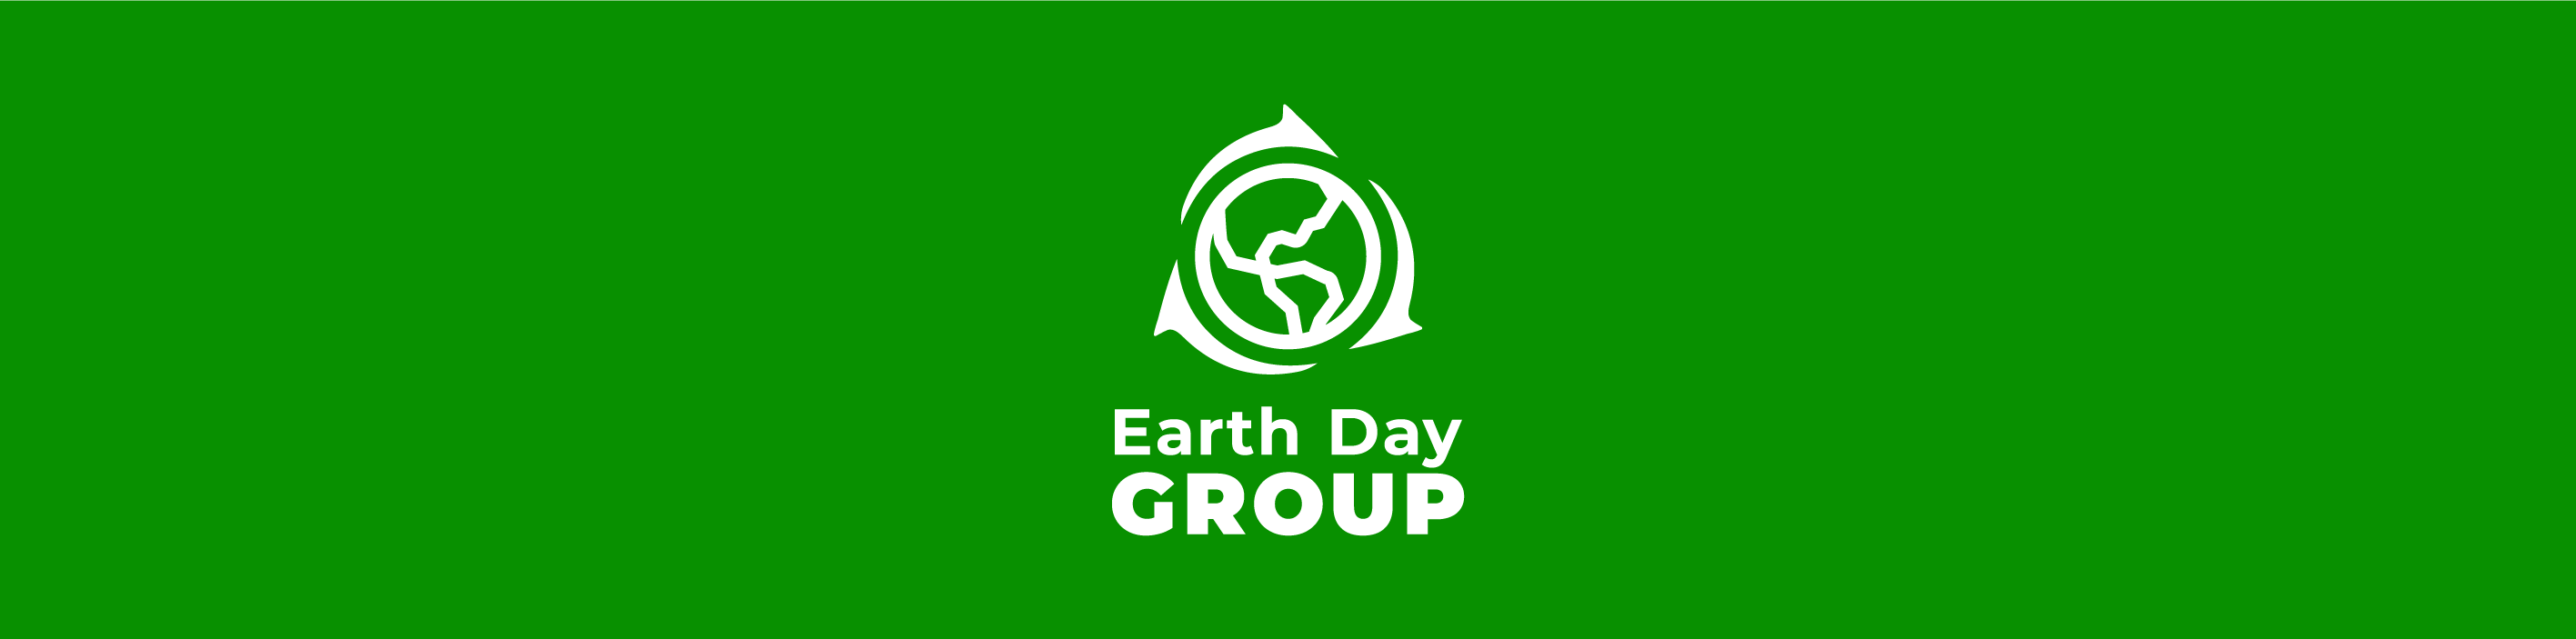 Earth Day Group